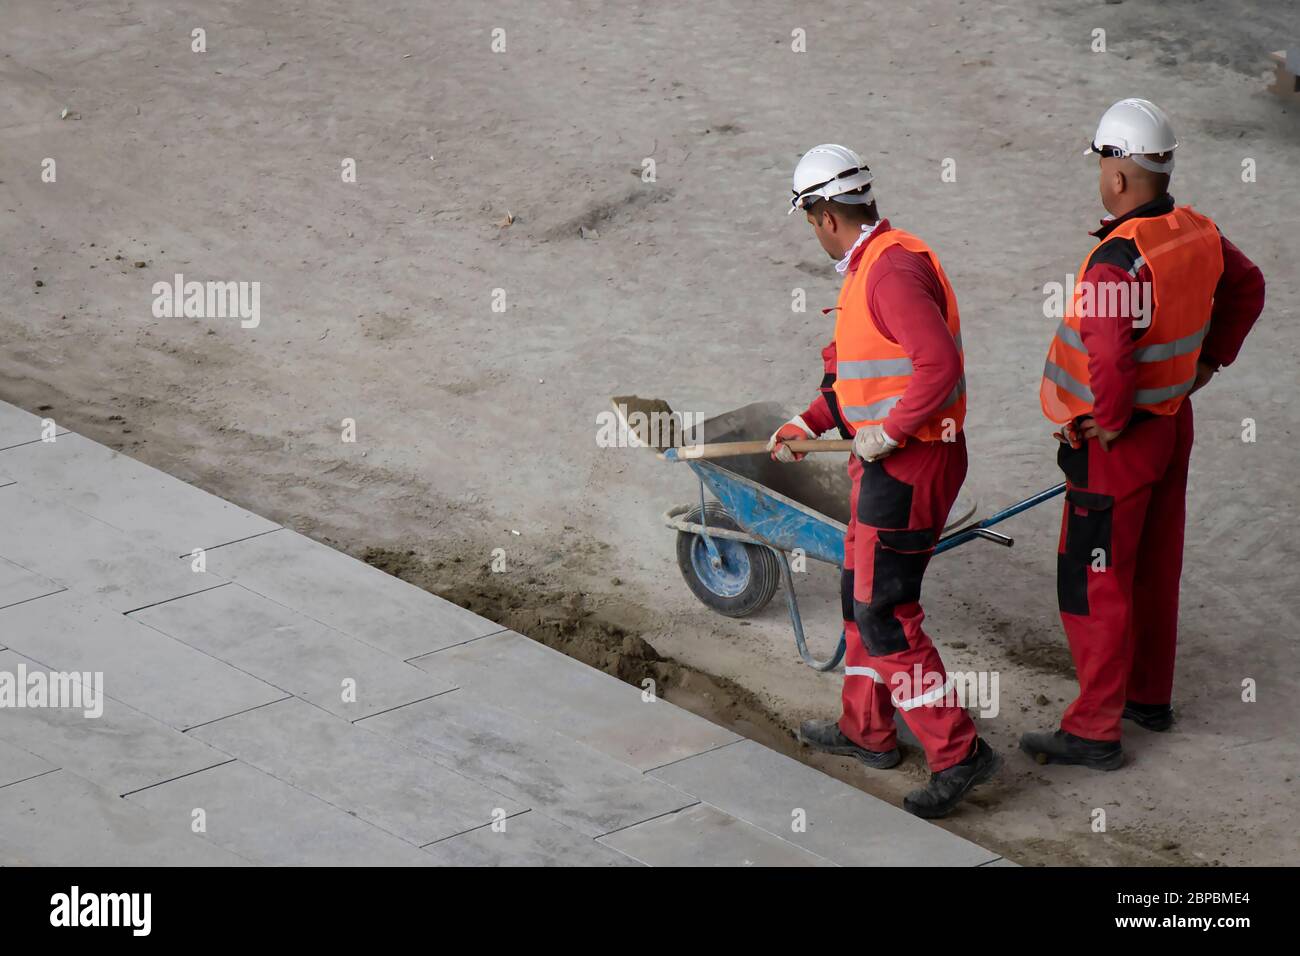 Belgrade, Serbia - May 18, 2020: Construction workers working with shovel and wheelbarrow, high angle view Stock Photo